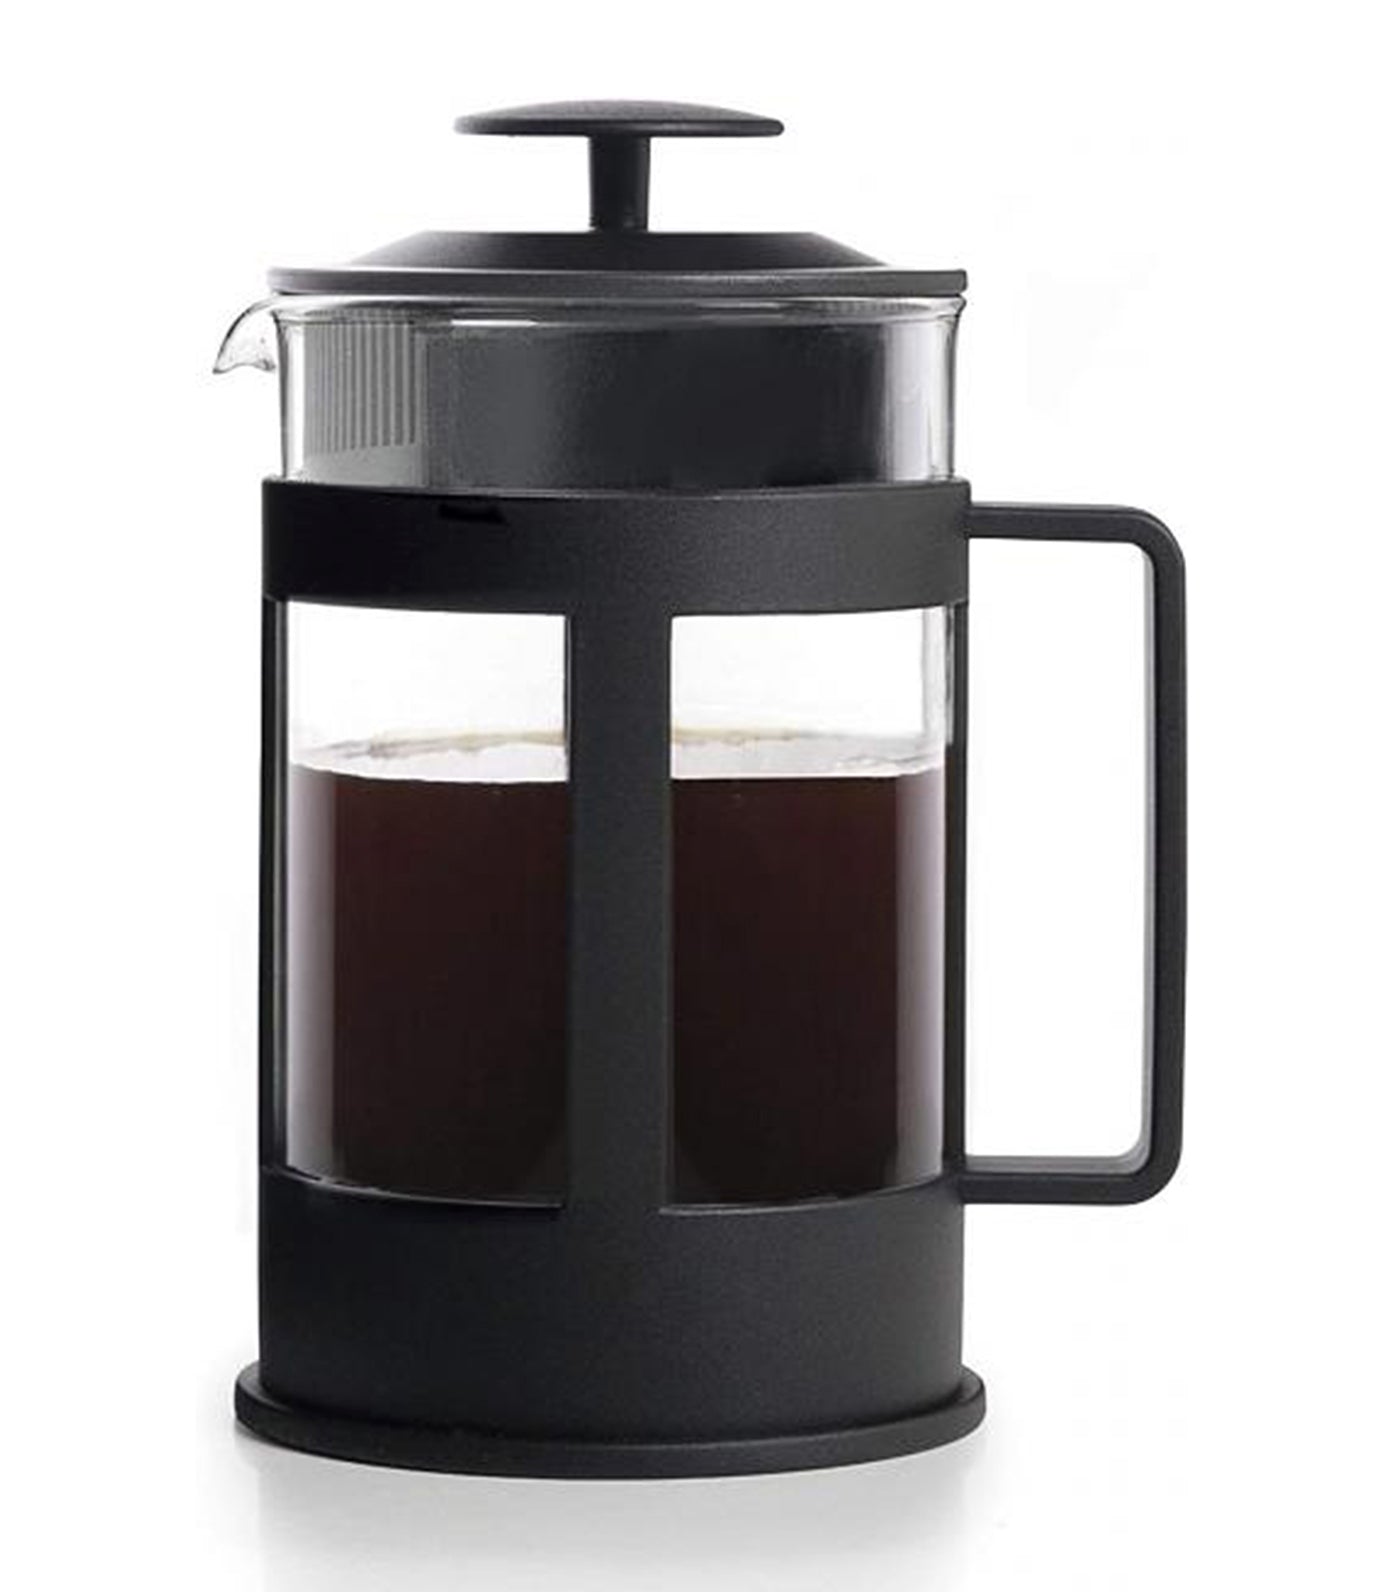 Lacor French Coffee Maker - Black